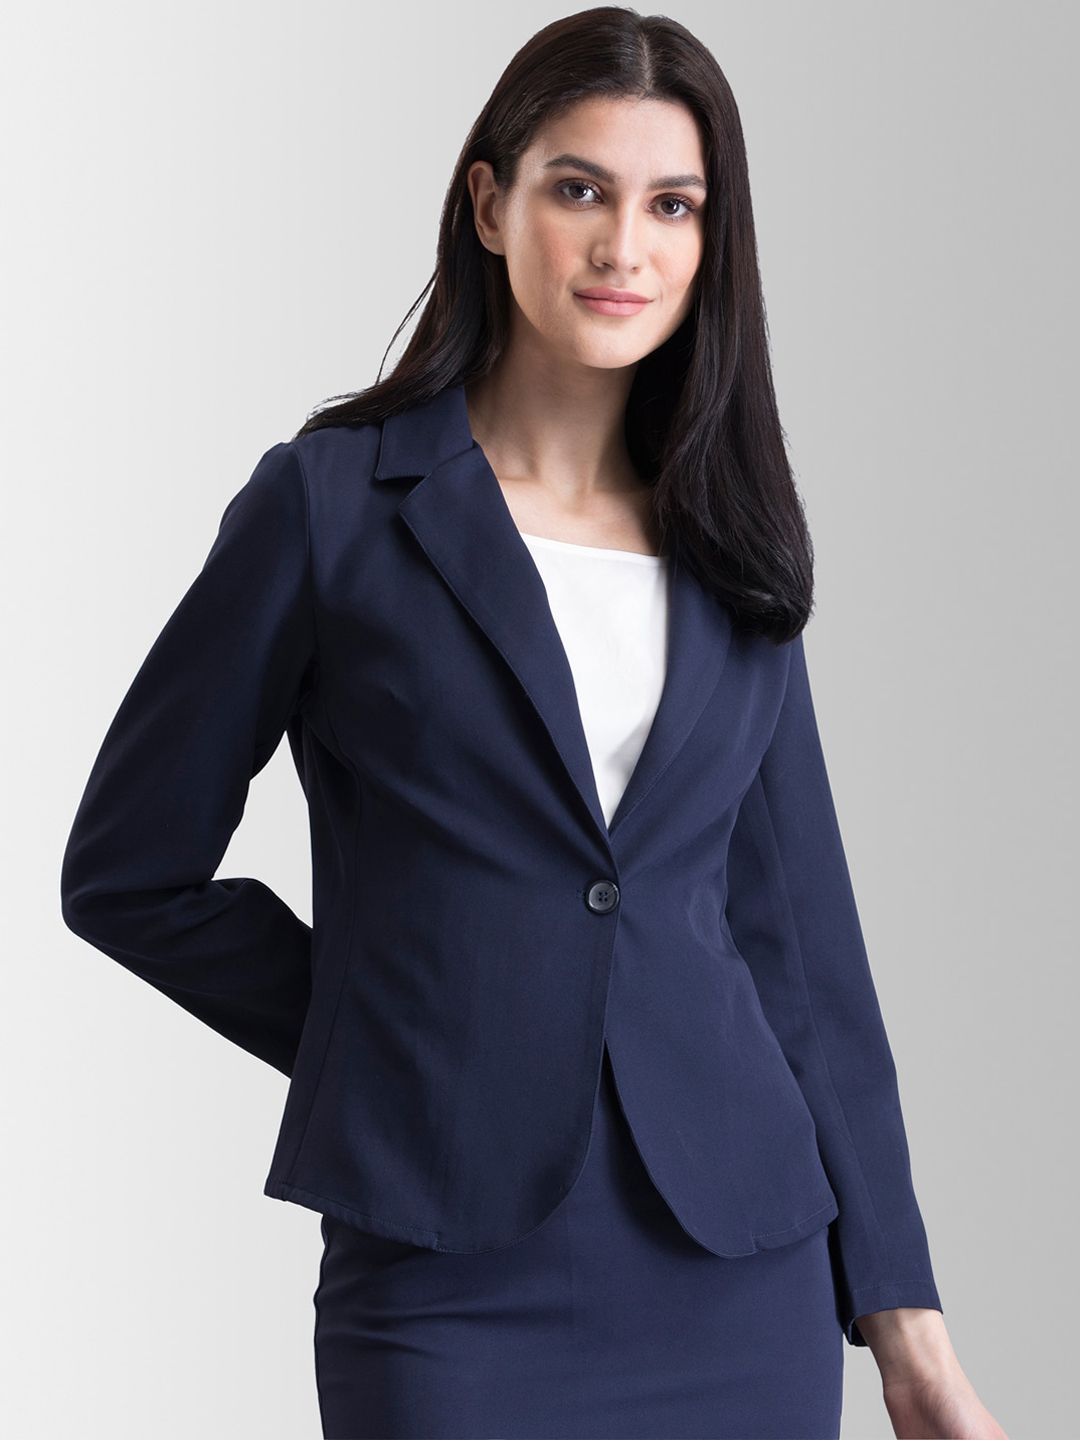 FableStreet Women Navy Blue Solid Tailored Jacket Price in India